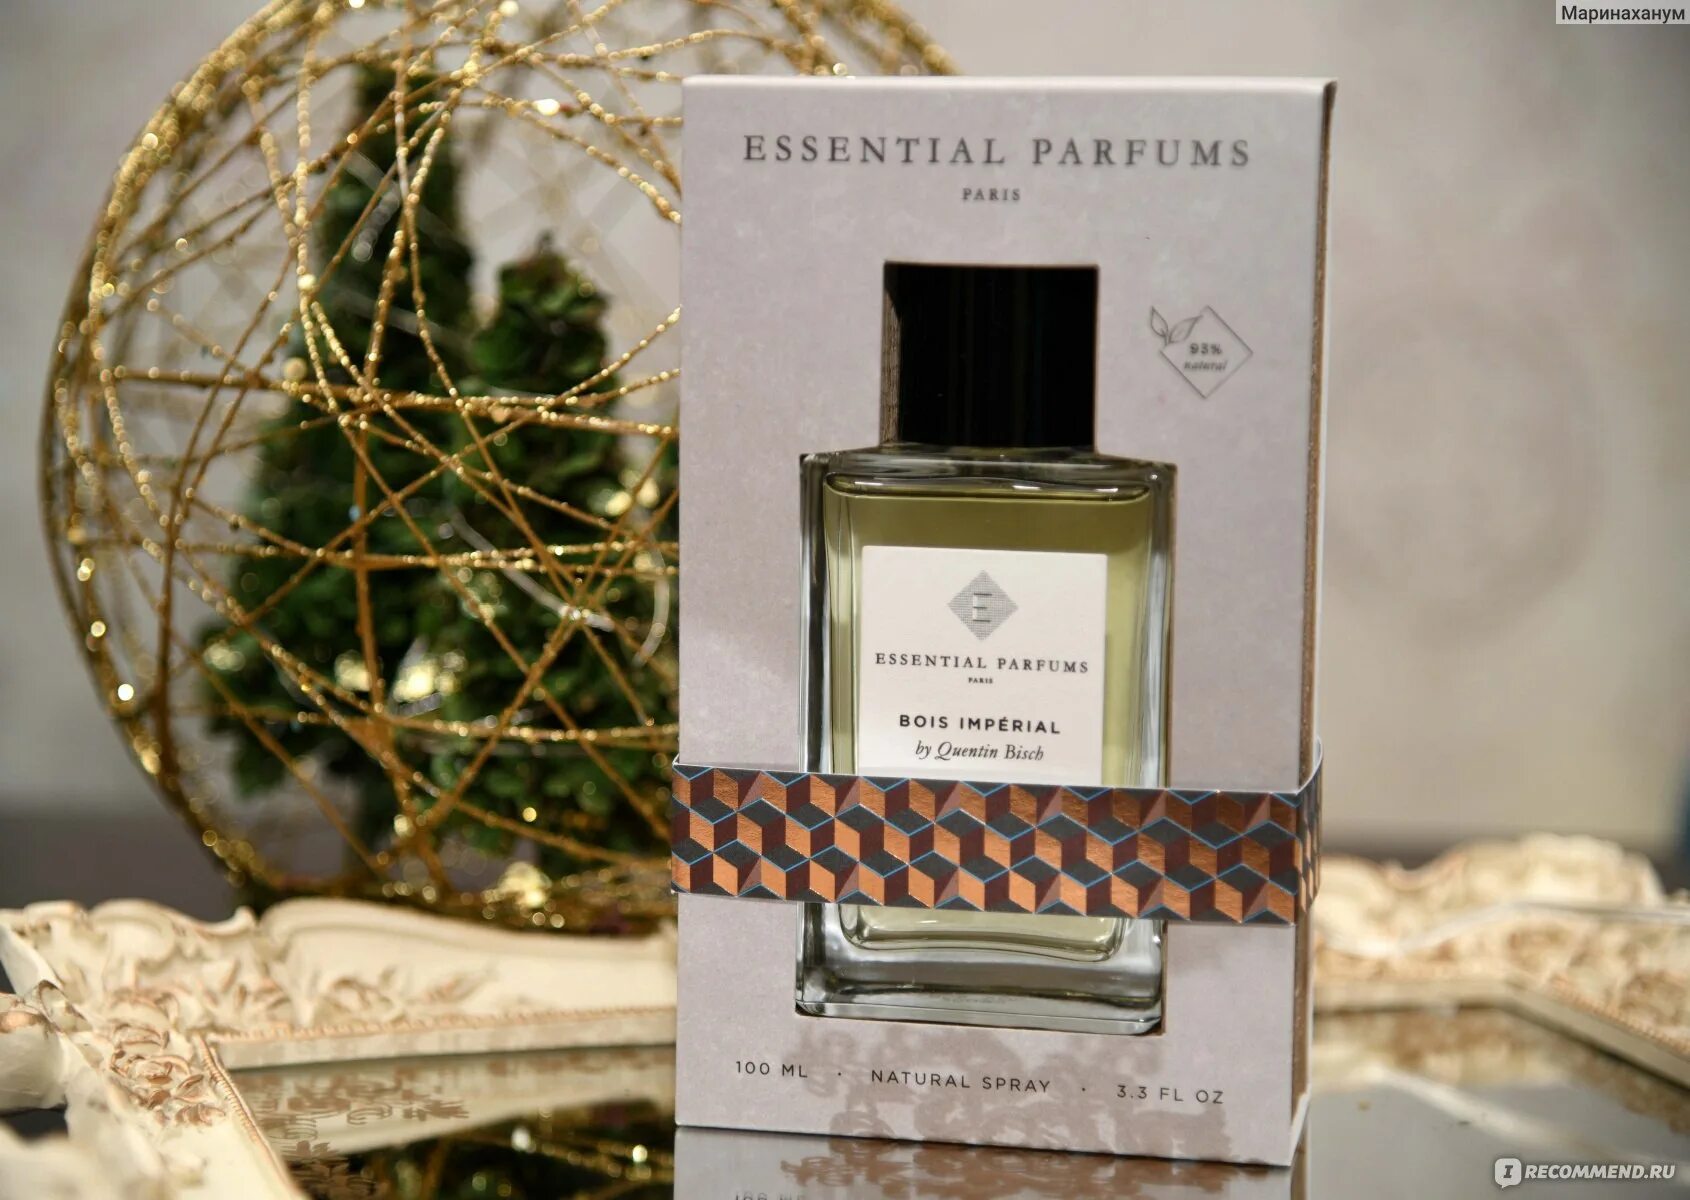 Bois imperial essential parfums limited edition. Essential Parfums bois Imperial. Аромат bois Imperial Essential Parfums. Essential Parfums bois Imperial 10 ml. Essential Parfums Paris bois Imperial by Quentin bisch.